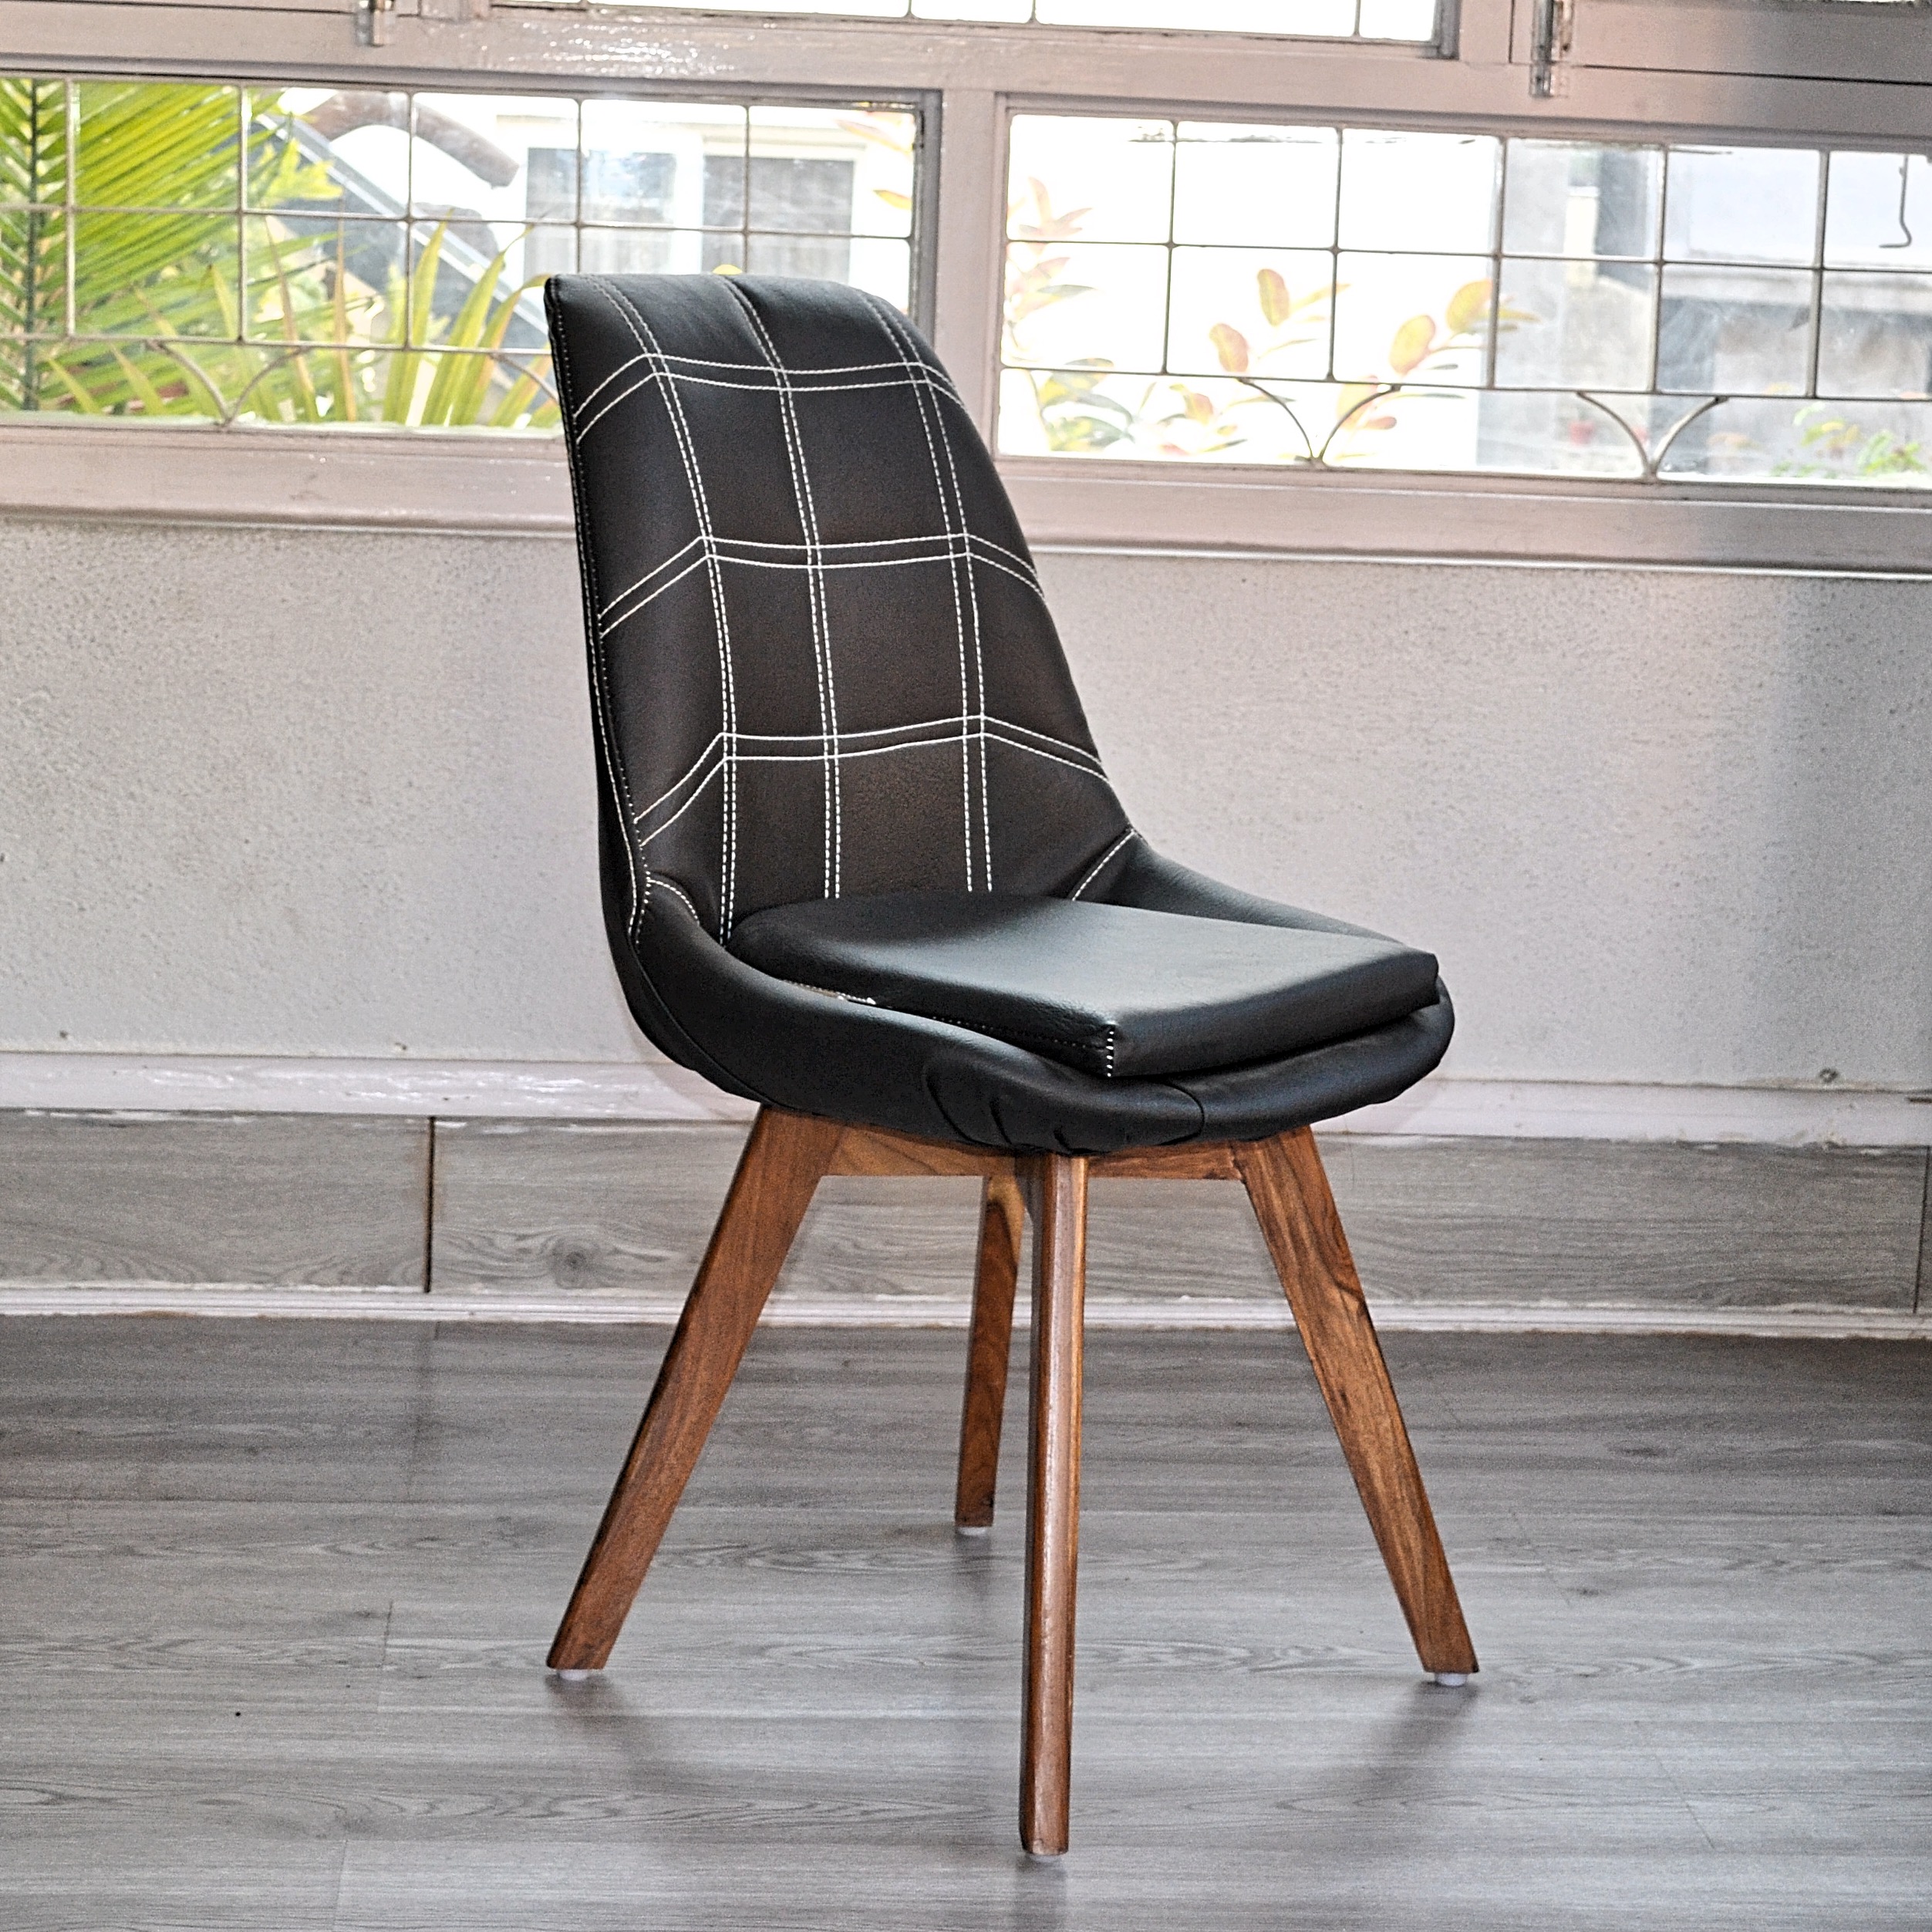 Kailash Upholstered Chair